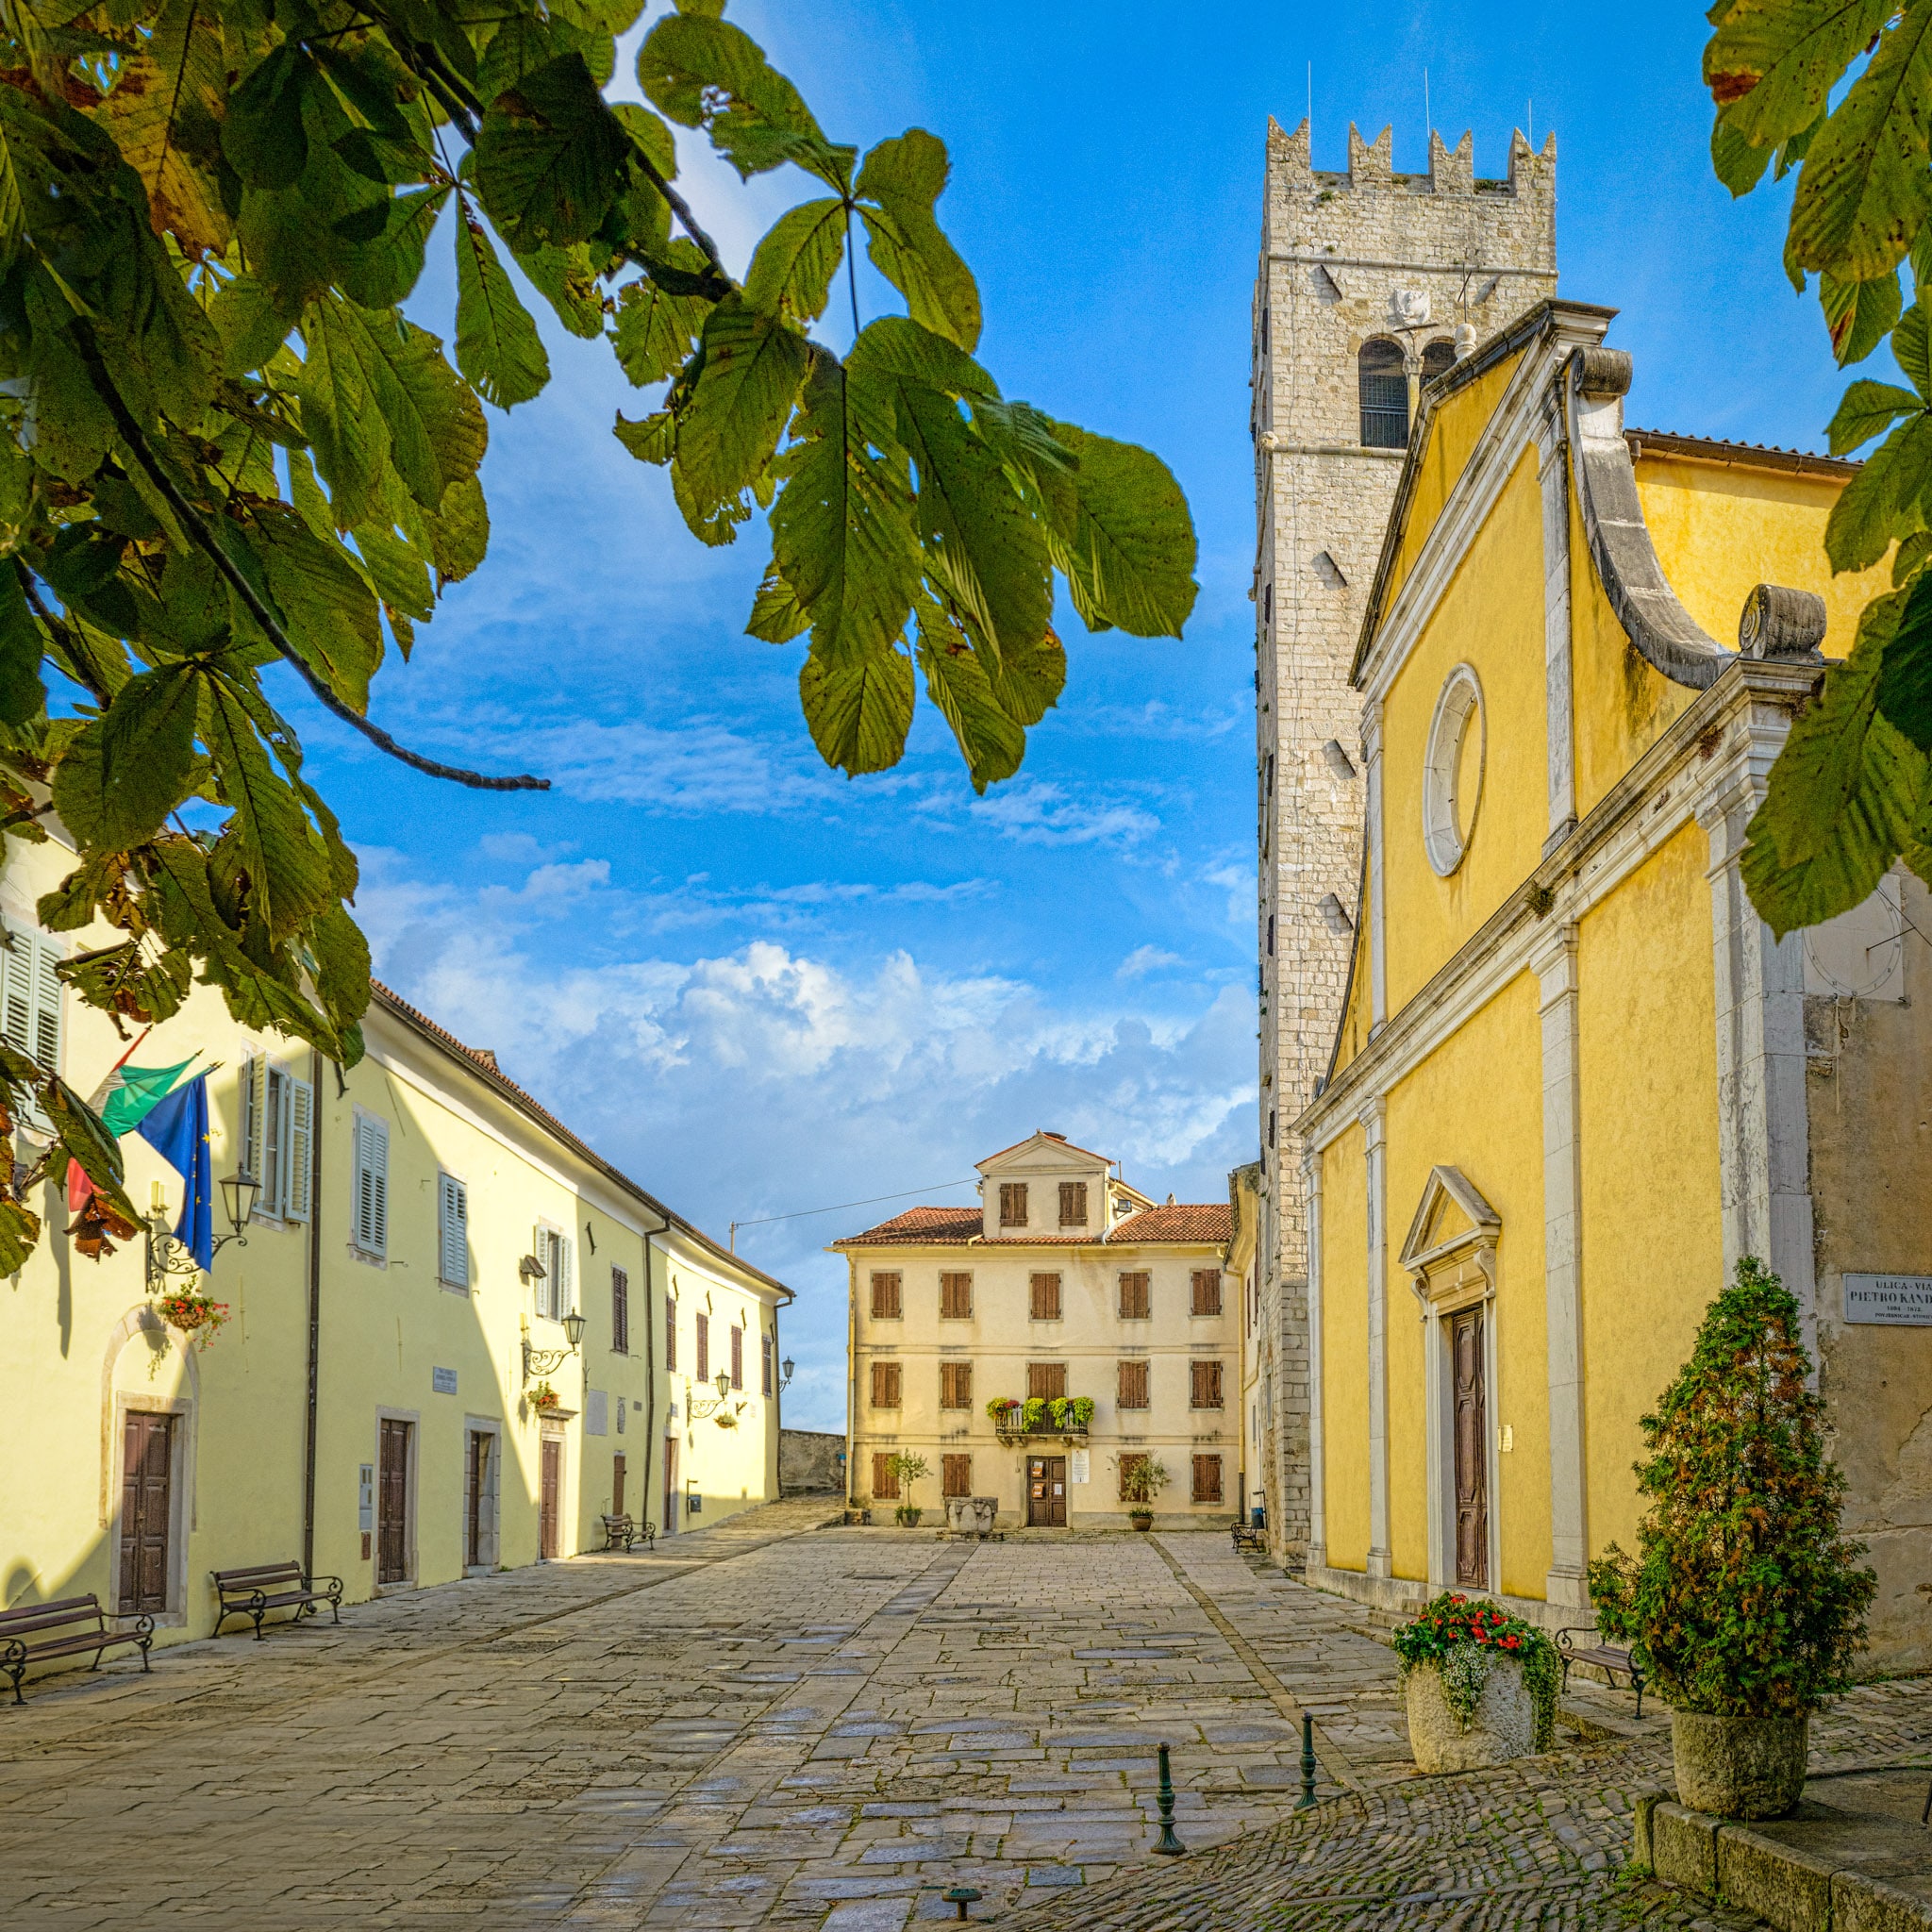 A view of the central square of the Medieval Istrian village of Motovun, Croatia, with the 13th Century bell tower, the Church of St. Stephen, and the Romanesque Municipal Palace.